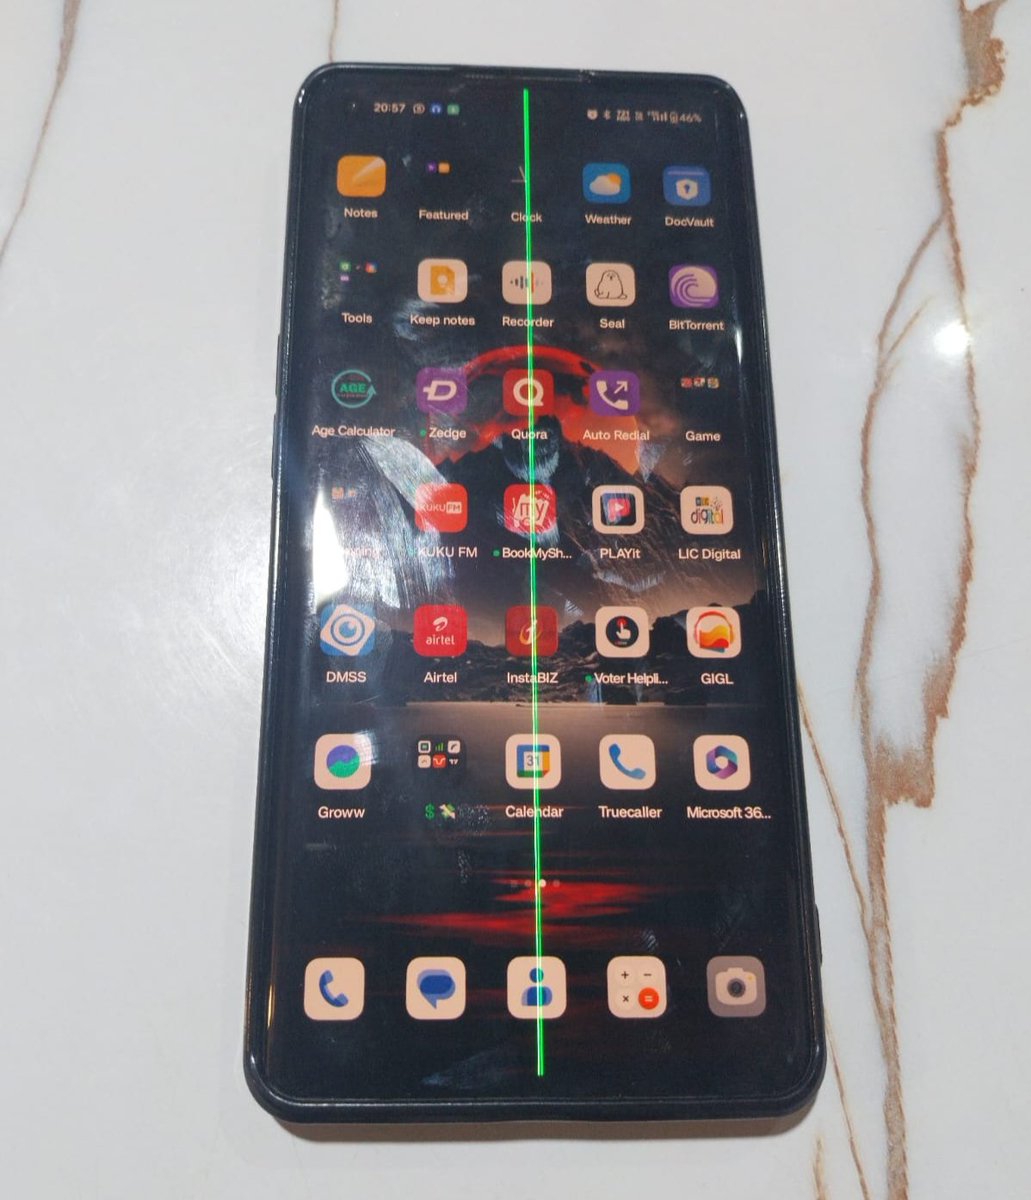 Dear @oppo @OPPOIndia my #reno5pro got a green line on screen after a software update, there is no physical damage to the screen, Can you help me with the solution ?
#oppo #opporeno5pro #oppogreenline #greenline #SCREEN #softwareupdatebug

#greenline #opporeno5pro